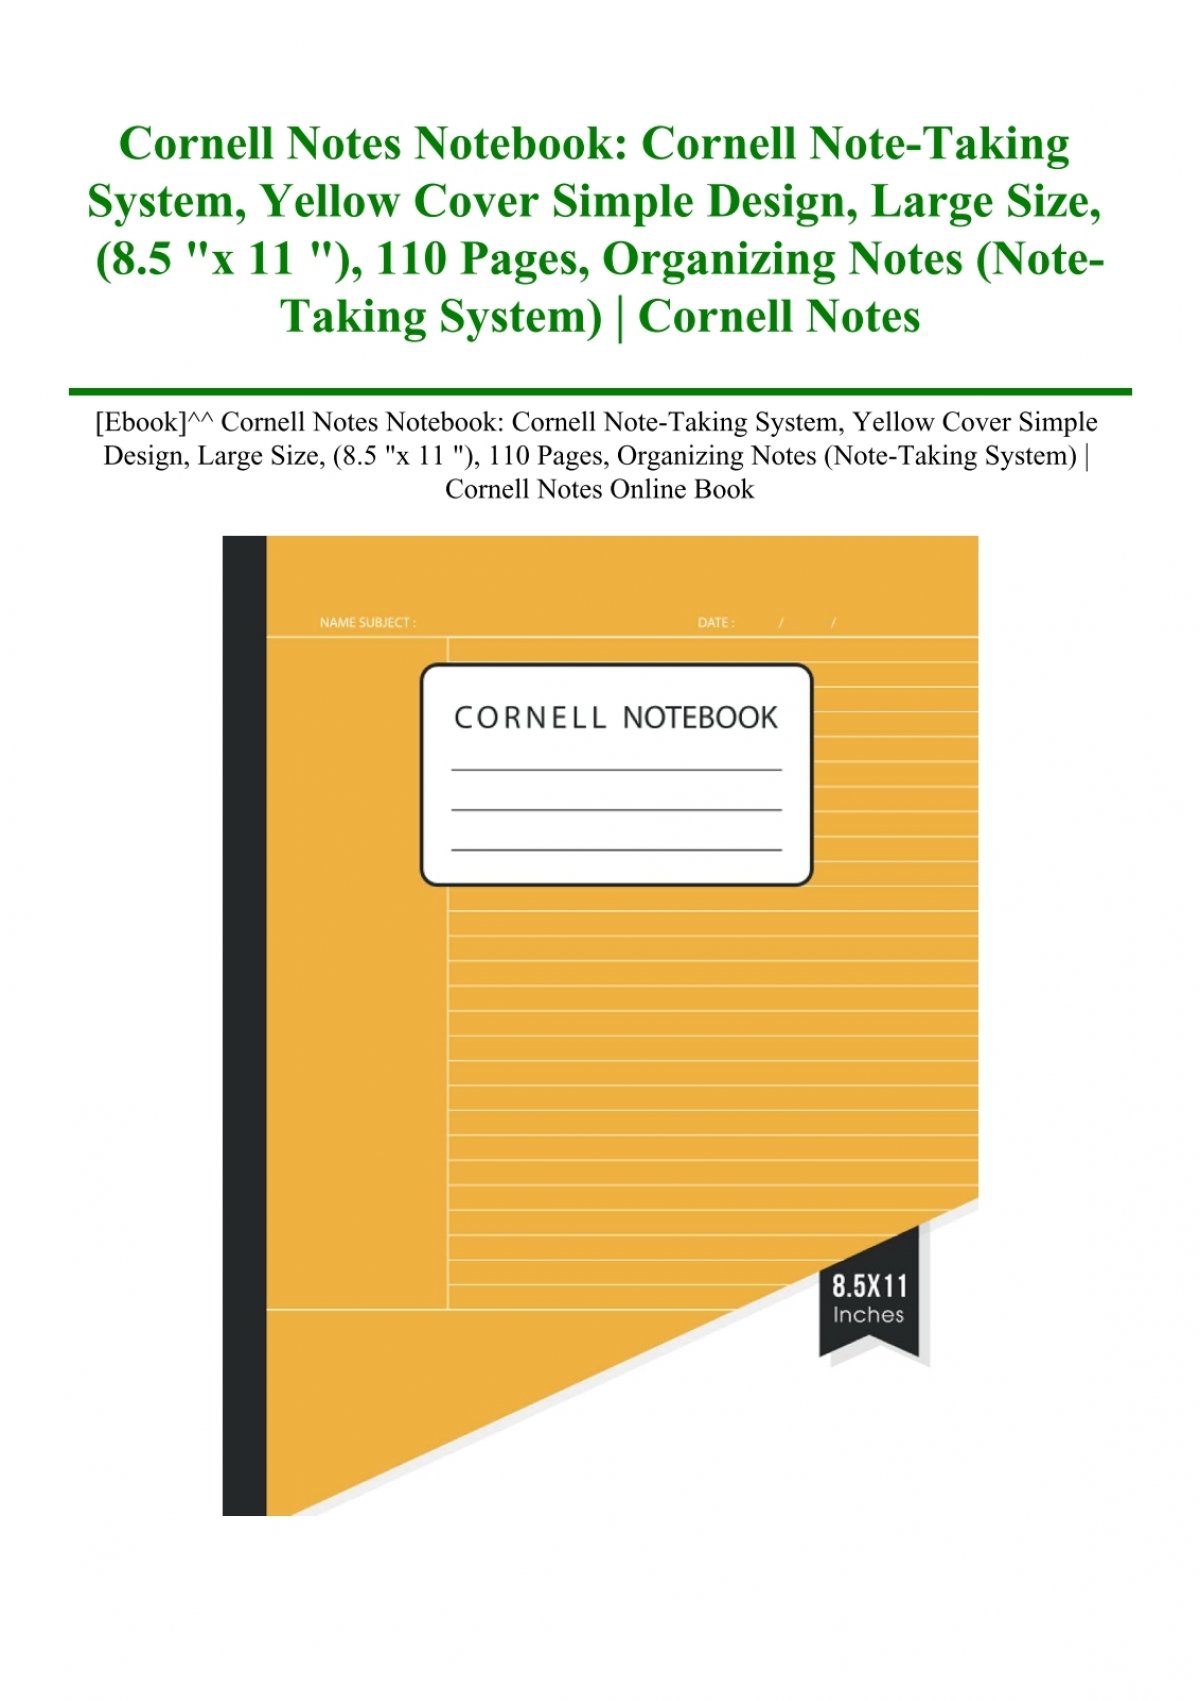 What Are The Four Reasons For Using The Cornell Note Taking System